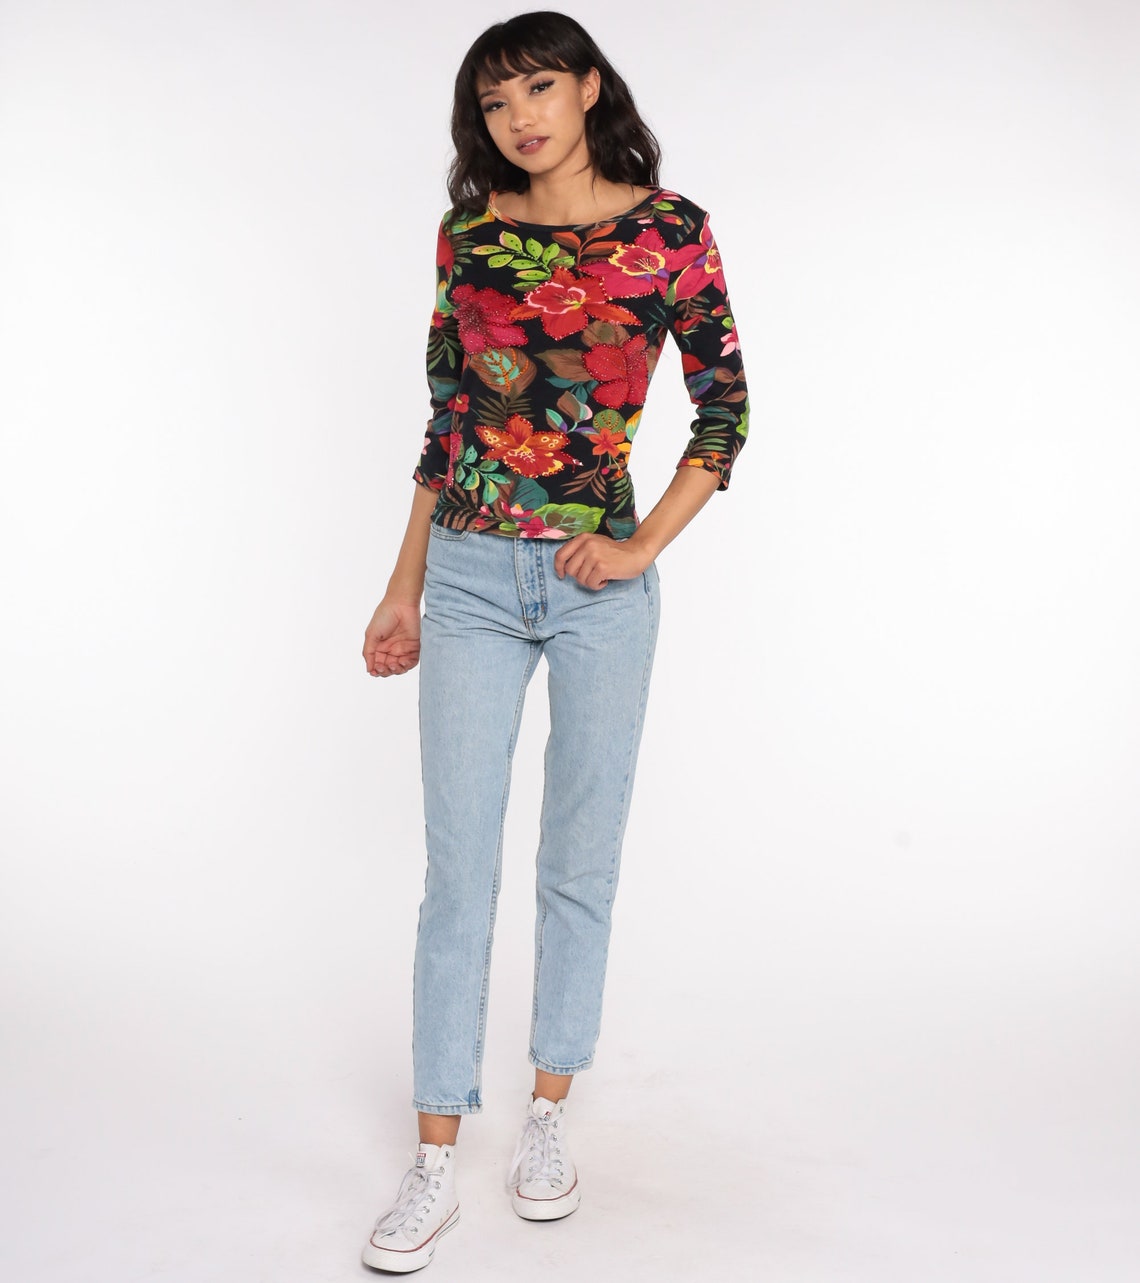 Sequin Floral Blouse Y2K Shirt Long 3/4 Sleeve Top Tropical - Etsy